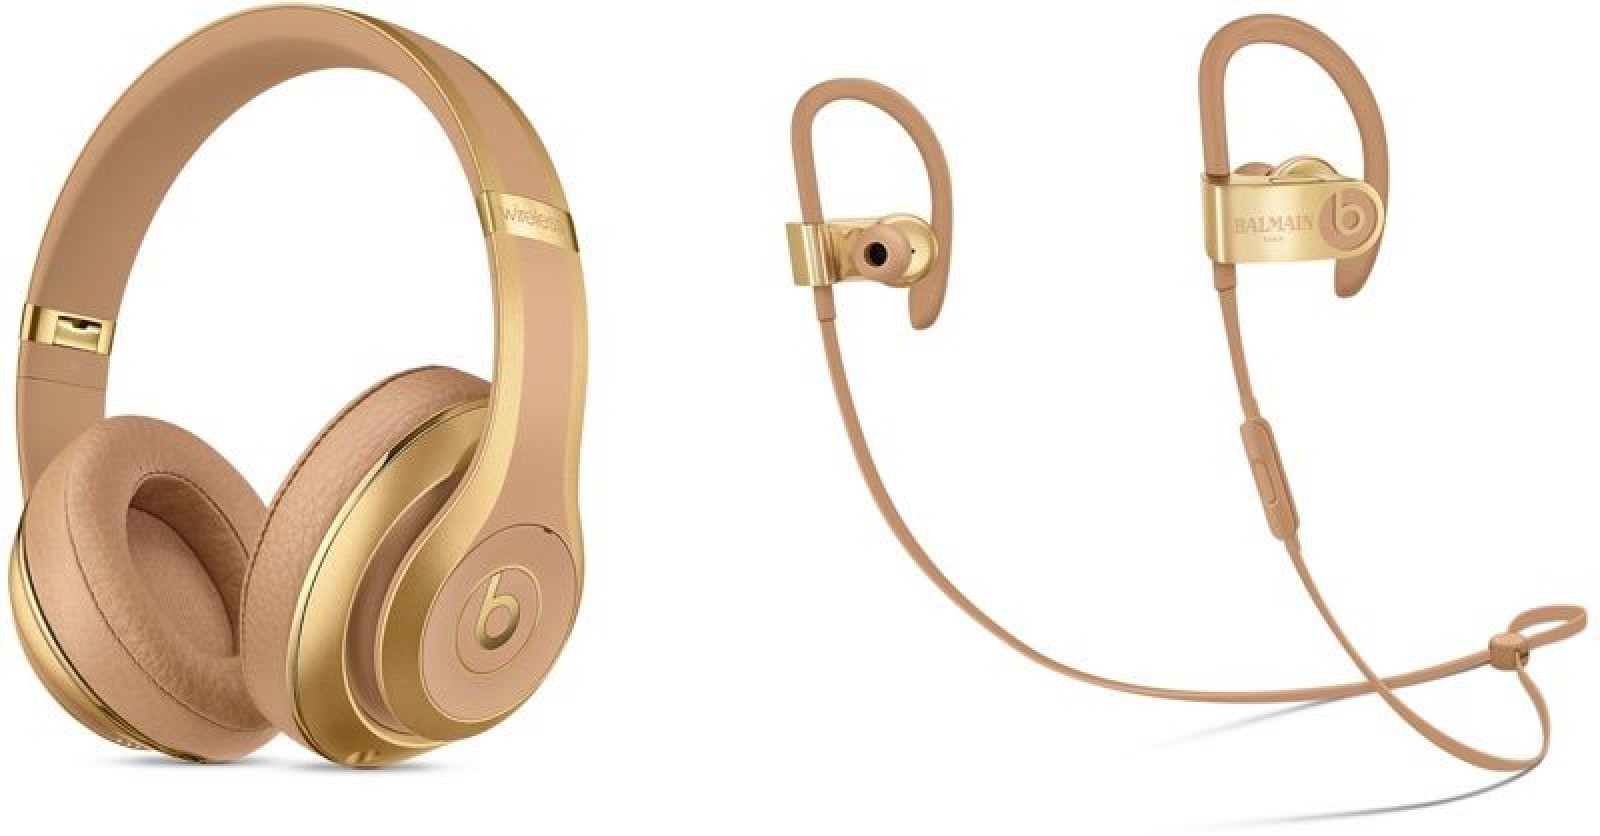 Kylie Jenner and new heavenly limited edition Beats Headphones